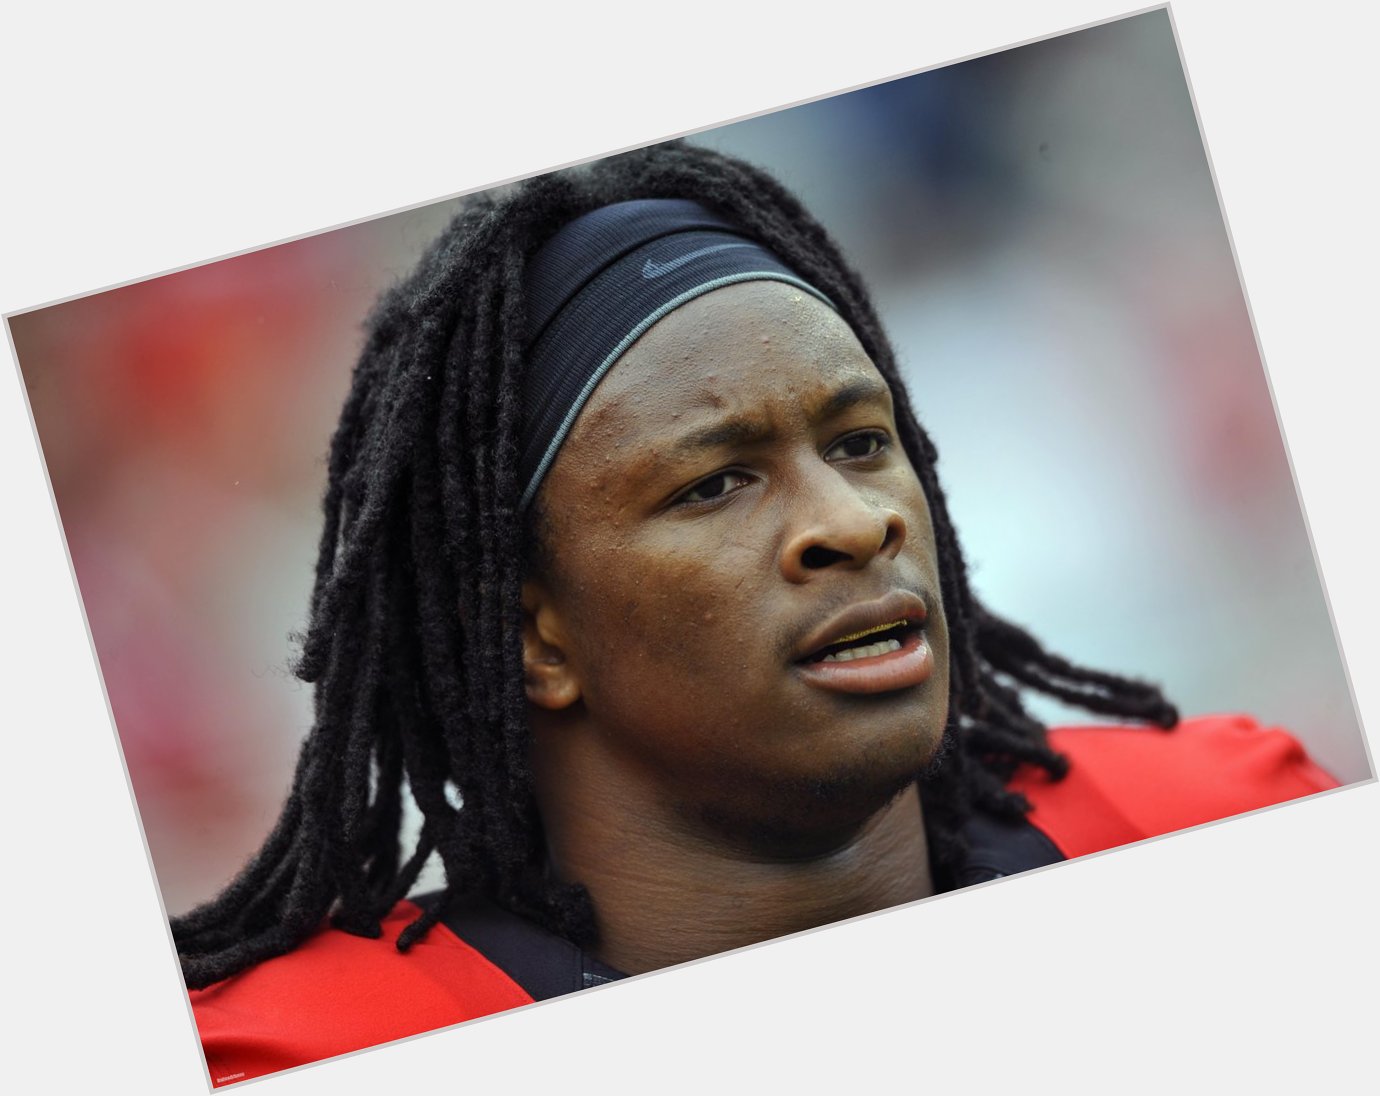 Happy 21st birthday to the one and only Todd Gurley! Congratulations 